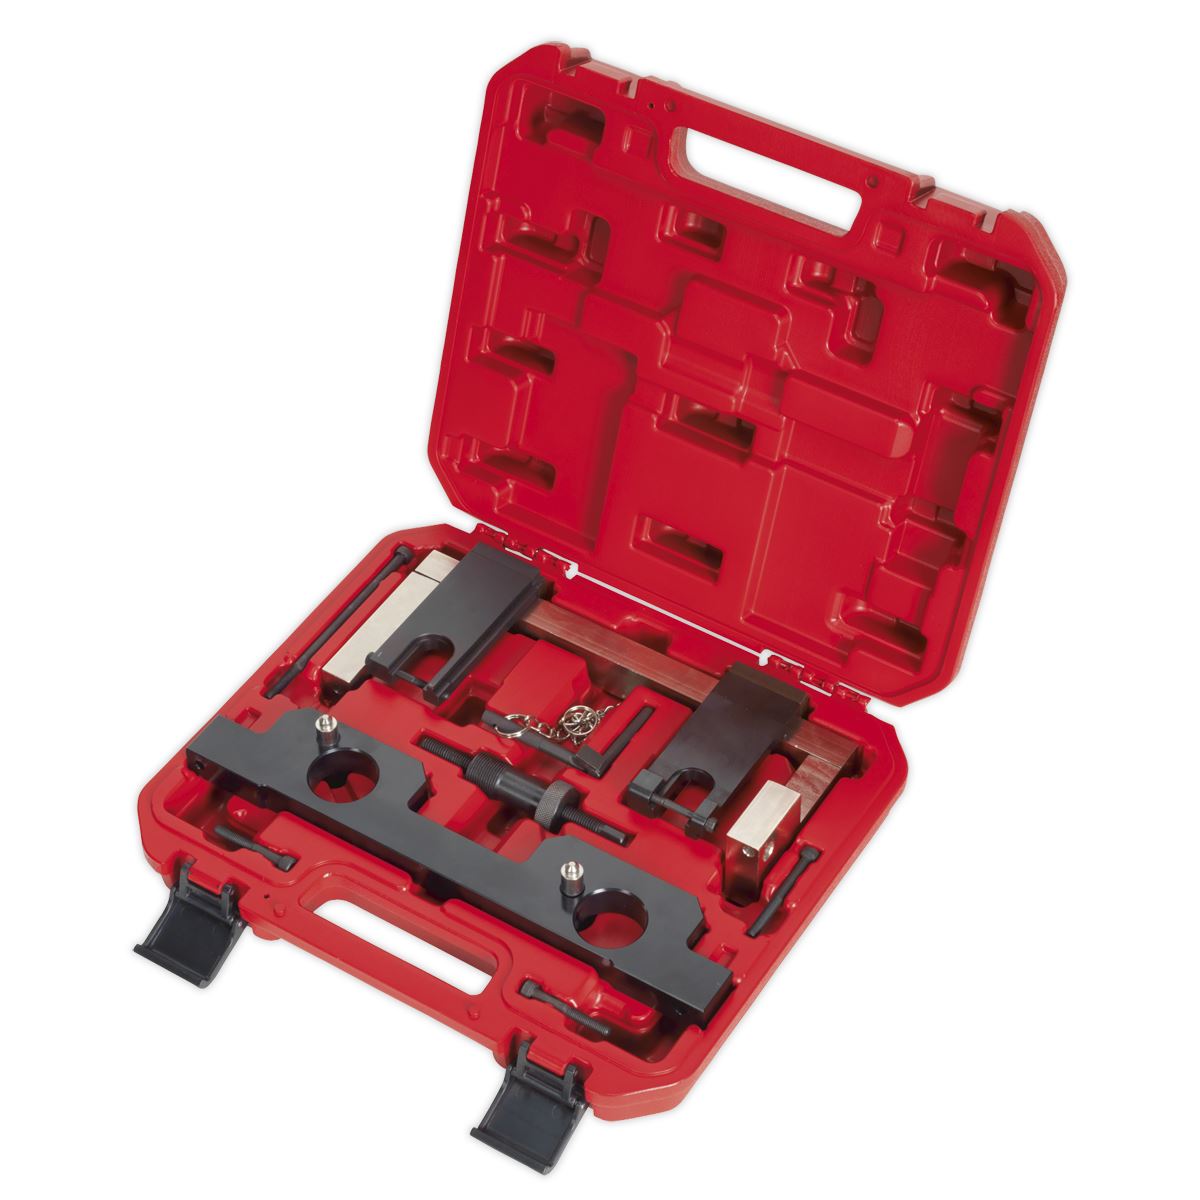 Sealey Petrol Engine Timing Tool Kit - for BMW 2.0 N20/N26 - Chain Drive